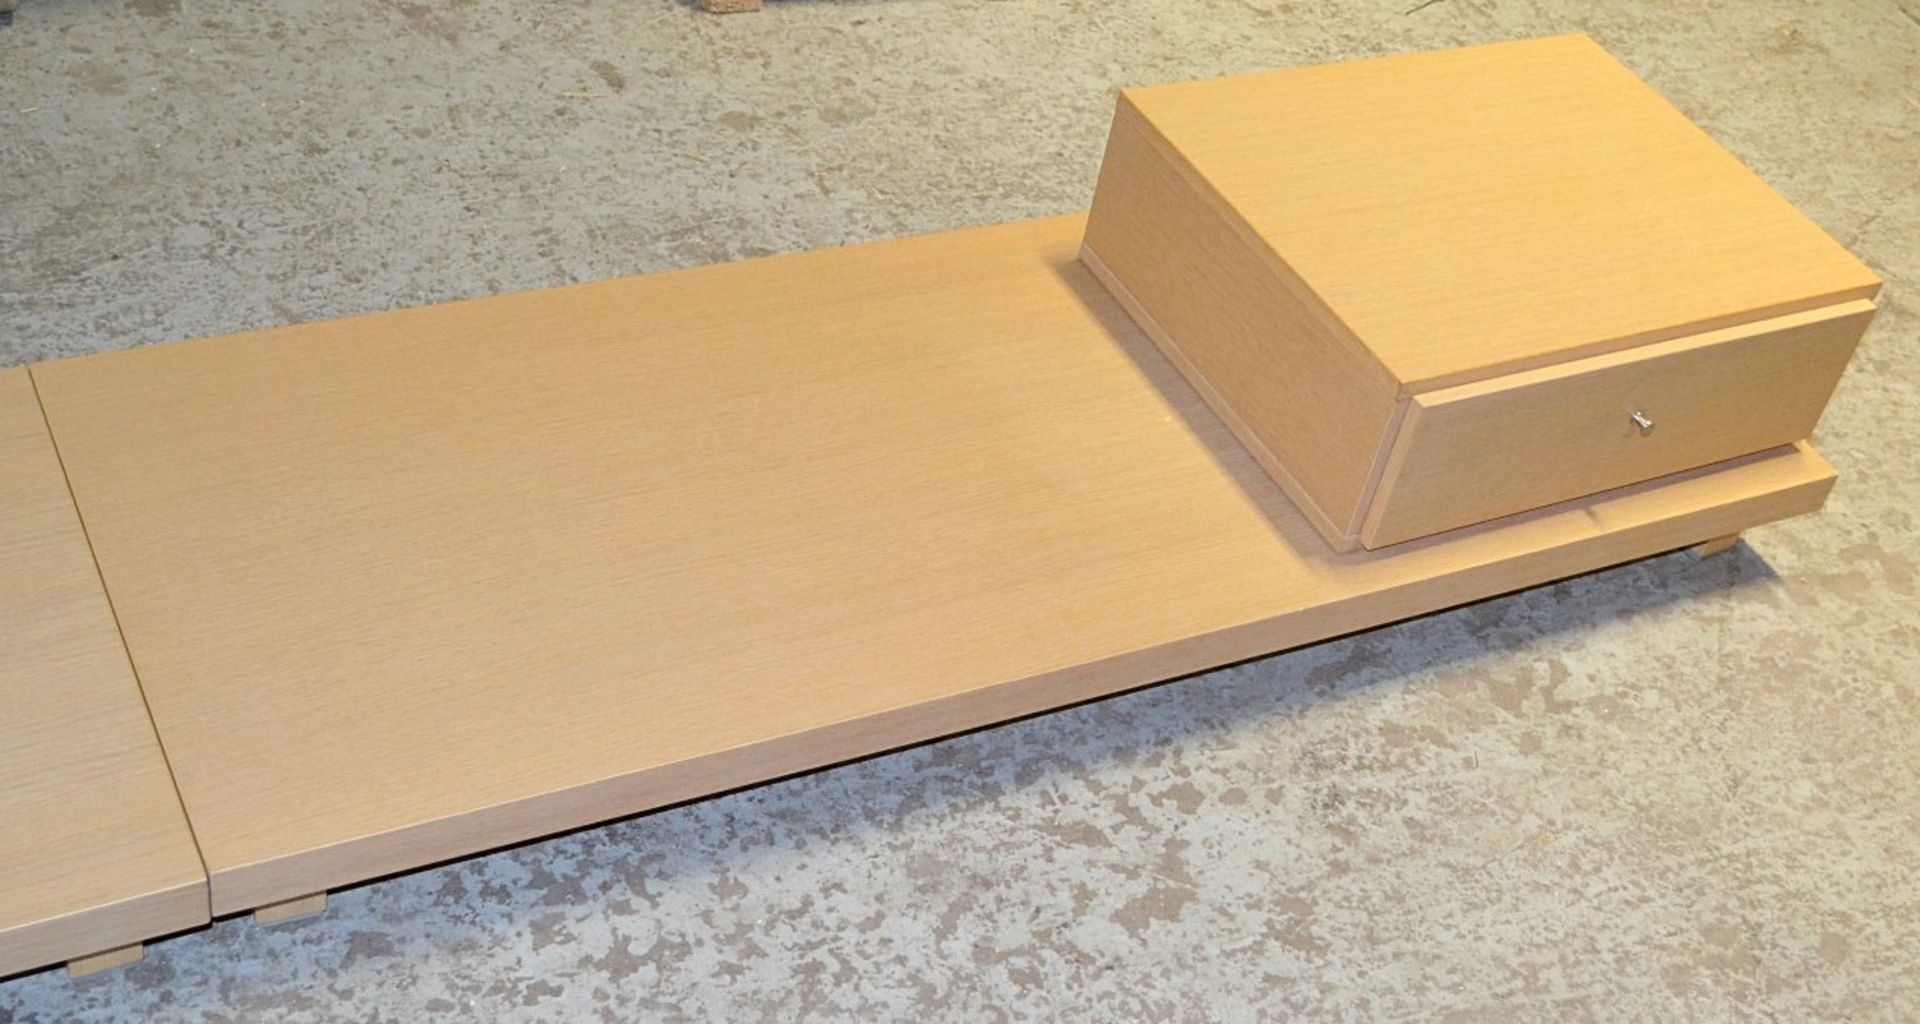 2 x Bedside Cabinets On Underbed Plinth With A Classic Oak Finish - 3 Metres Wide  - Used In Good - Image 7 of 8